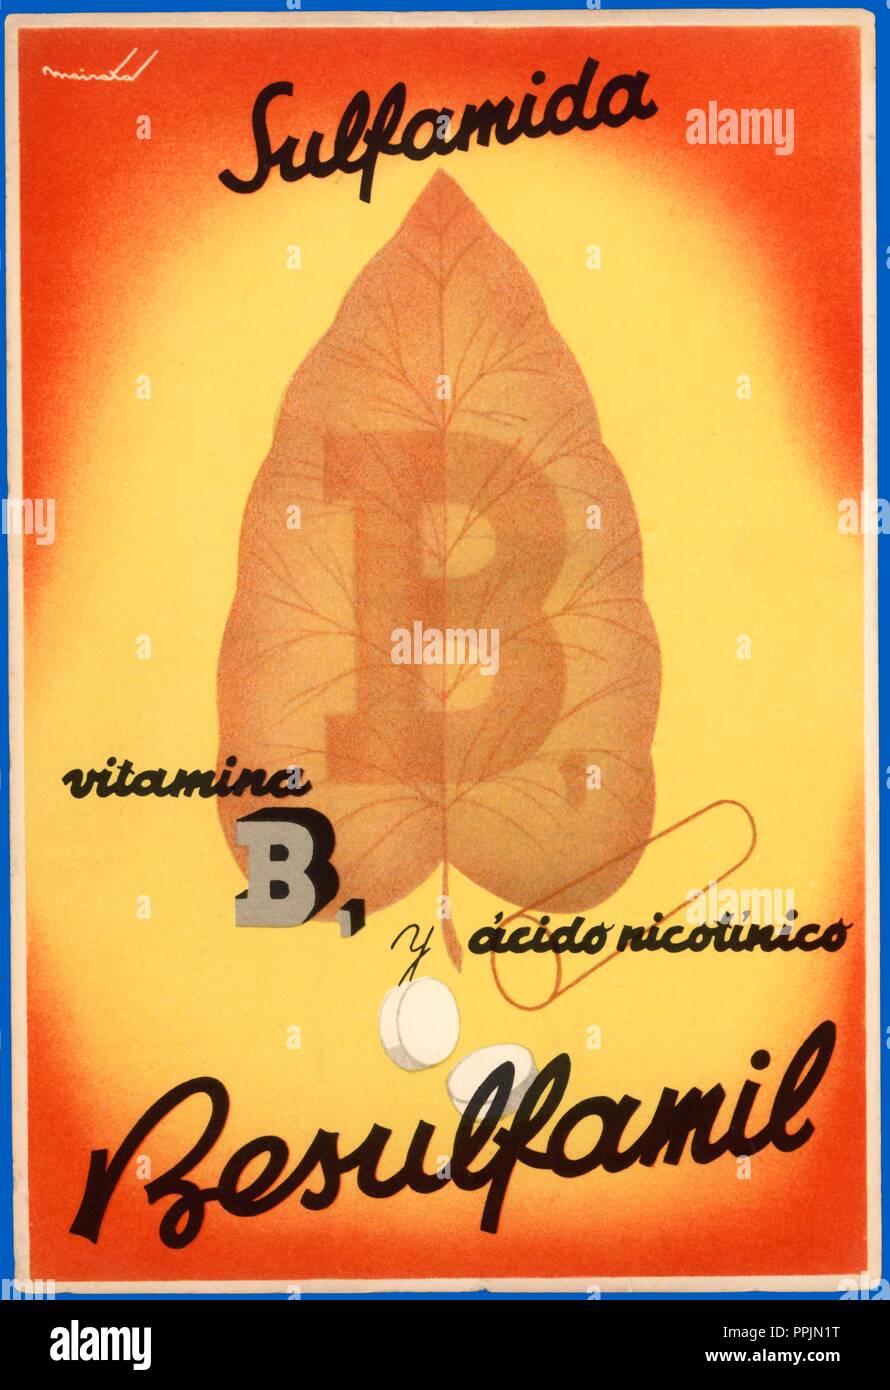 Pharmaceutical advertising Besulfamil, sulfamide, nicotinic acid and vitamin B, for the treatment of streptococcal, gonococcal, pneumococcal and stratigraphic infections. 1950s. Stock Photo